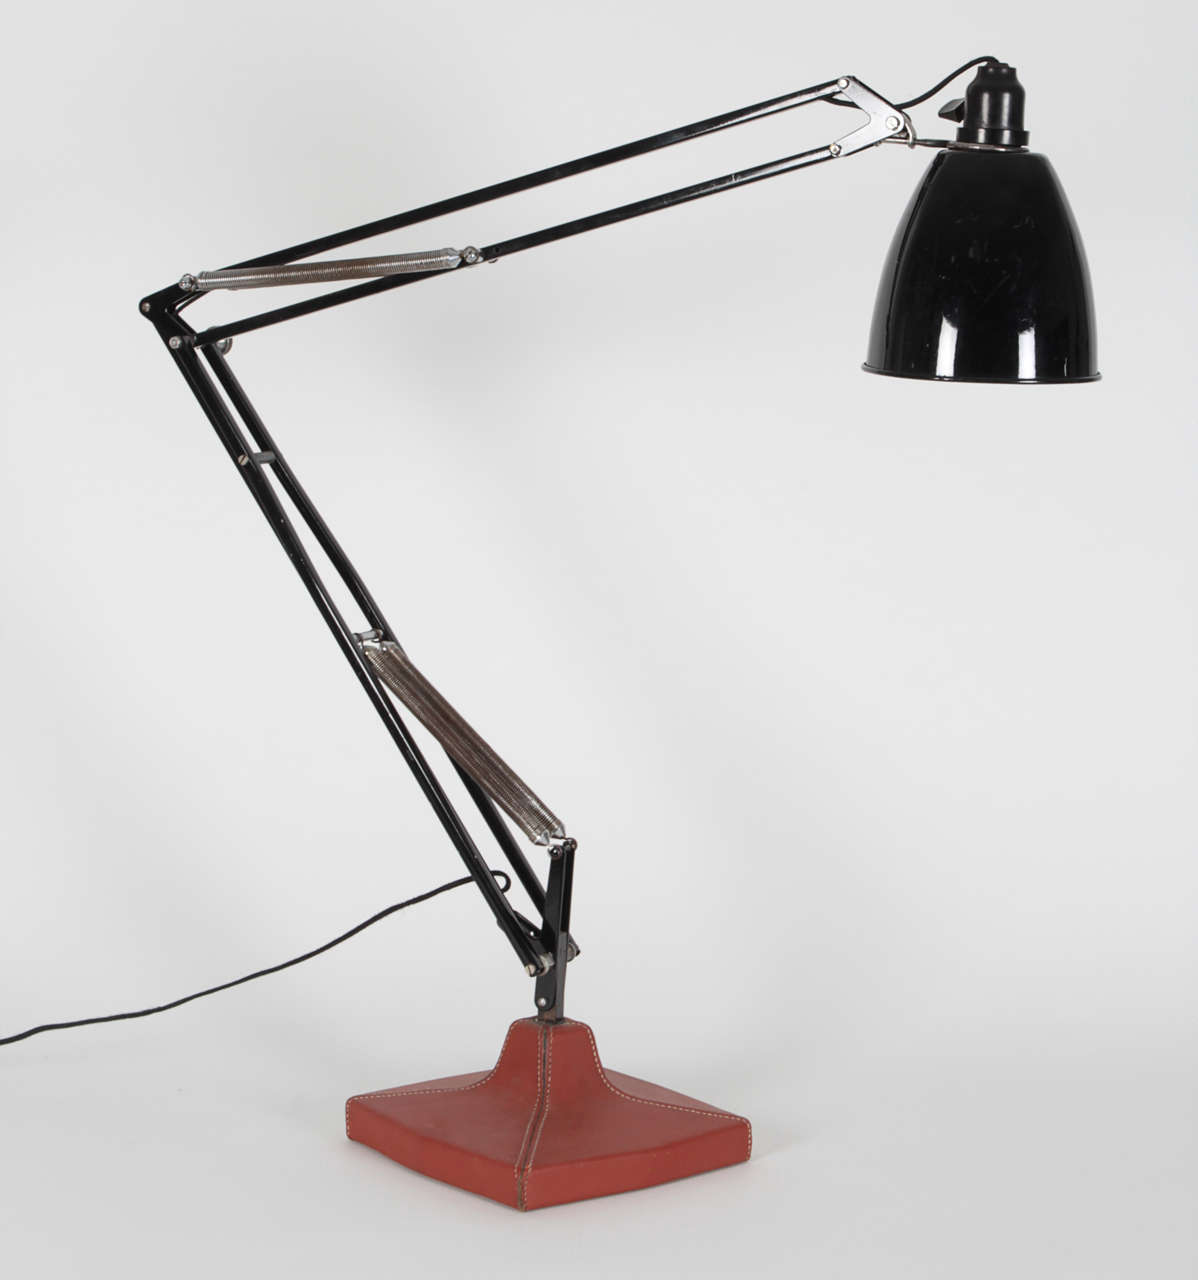 Black lacquered Anglepoise lamp with saddle-stitched tan leather covered base.